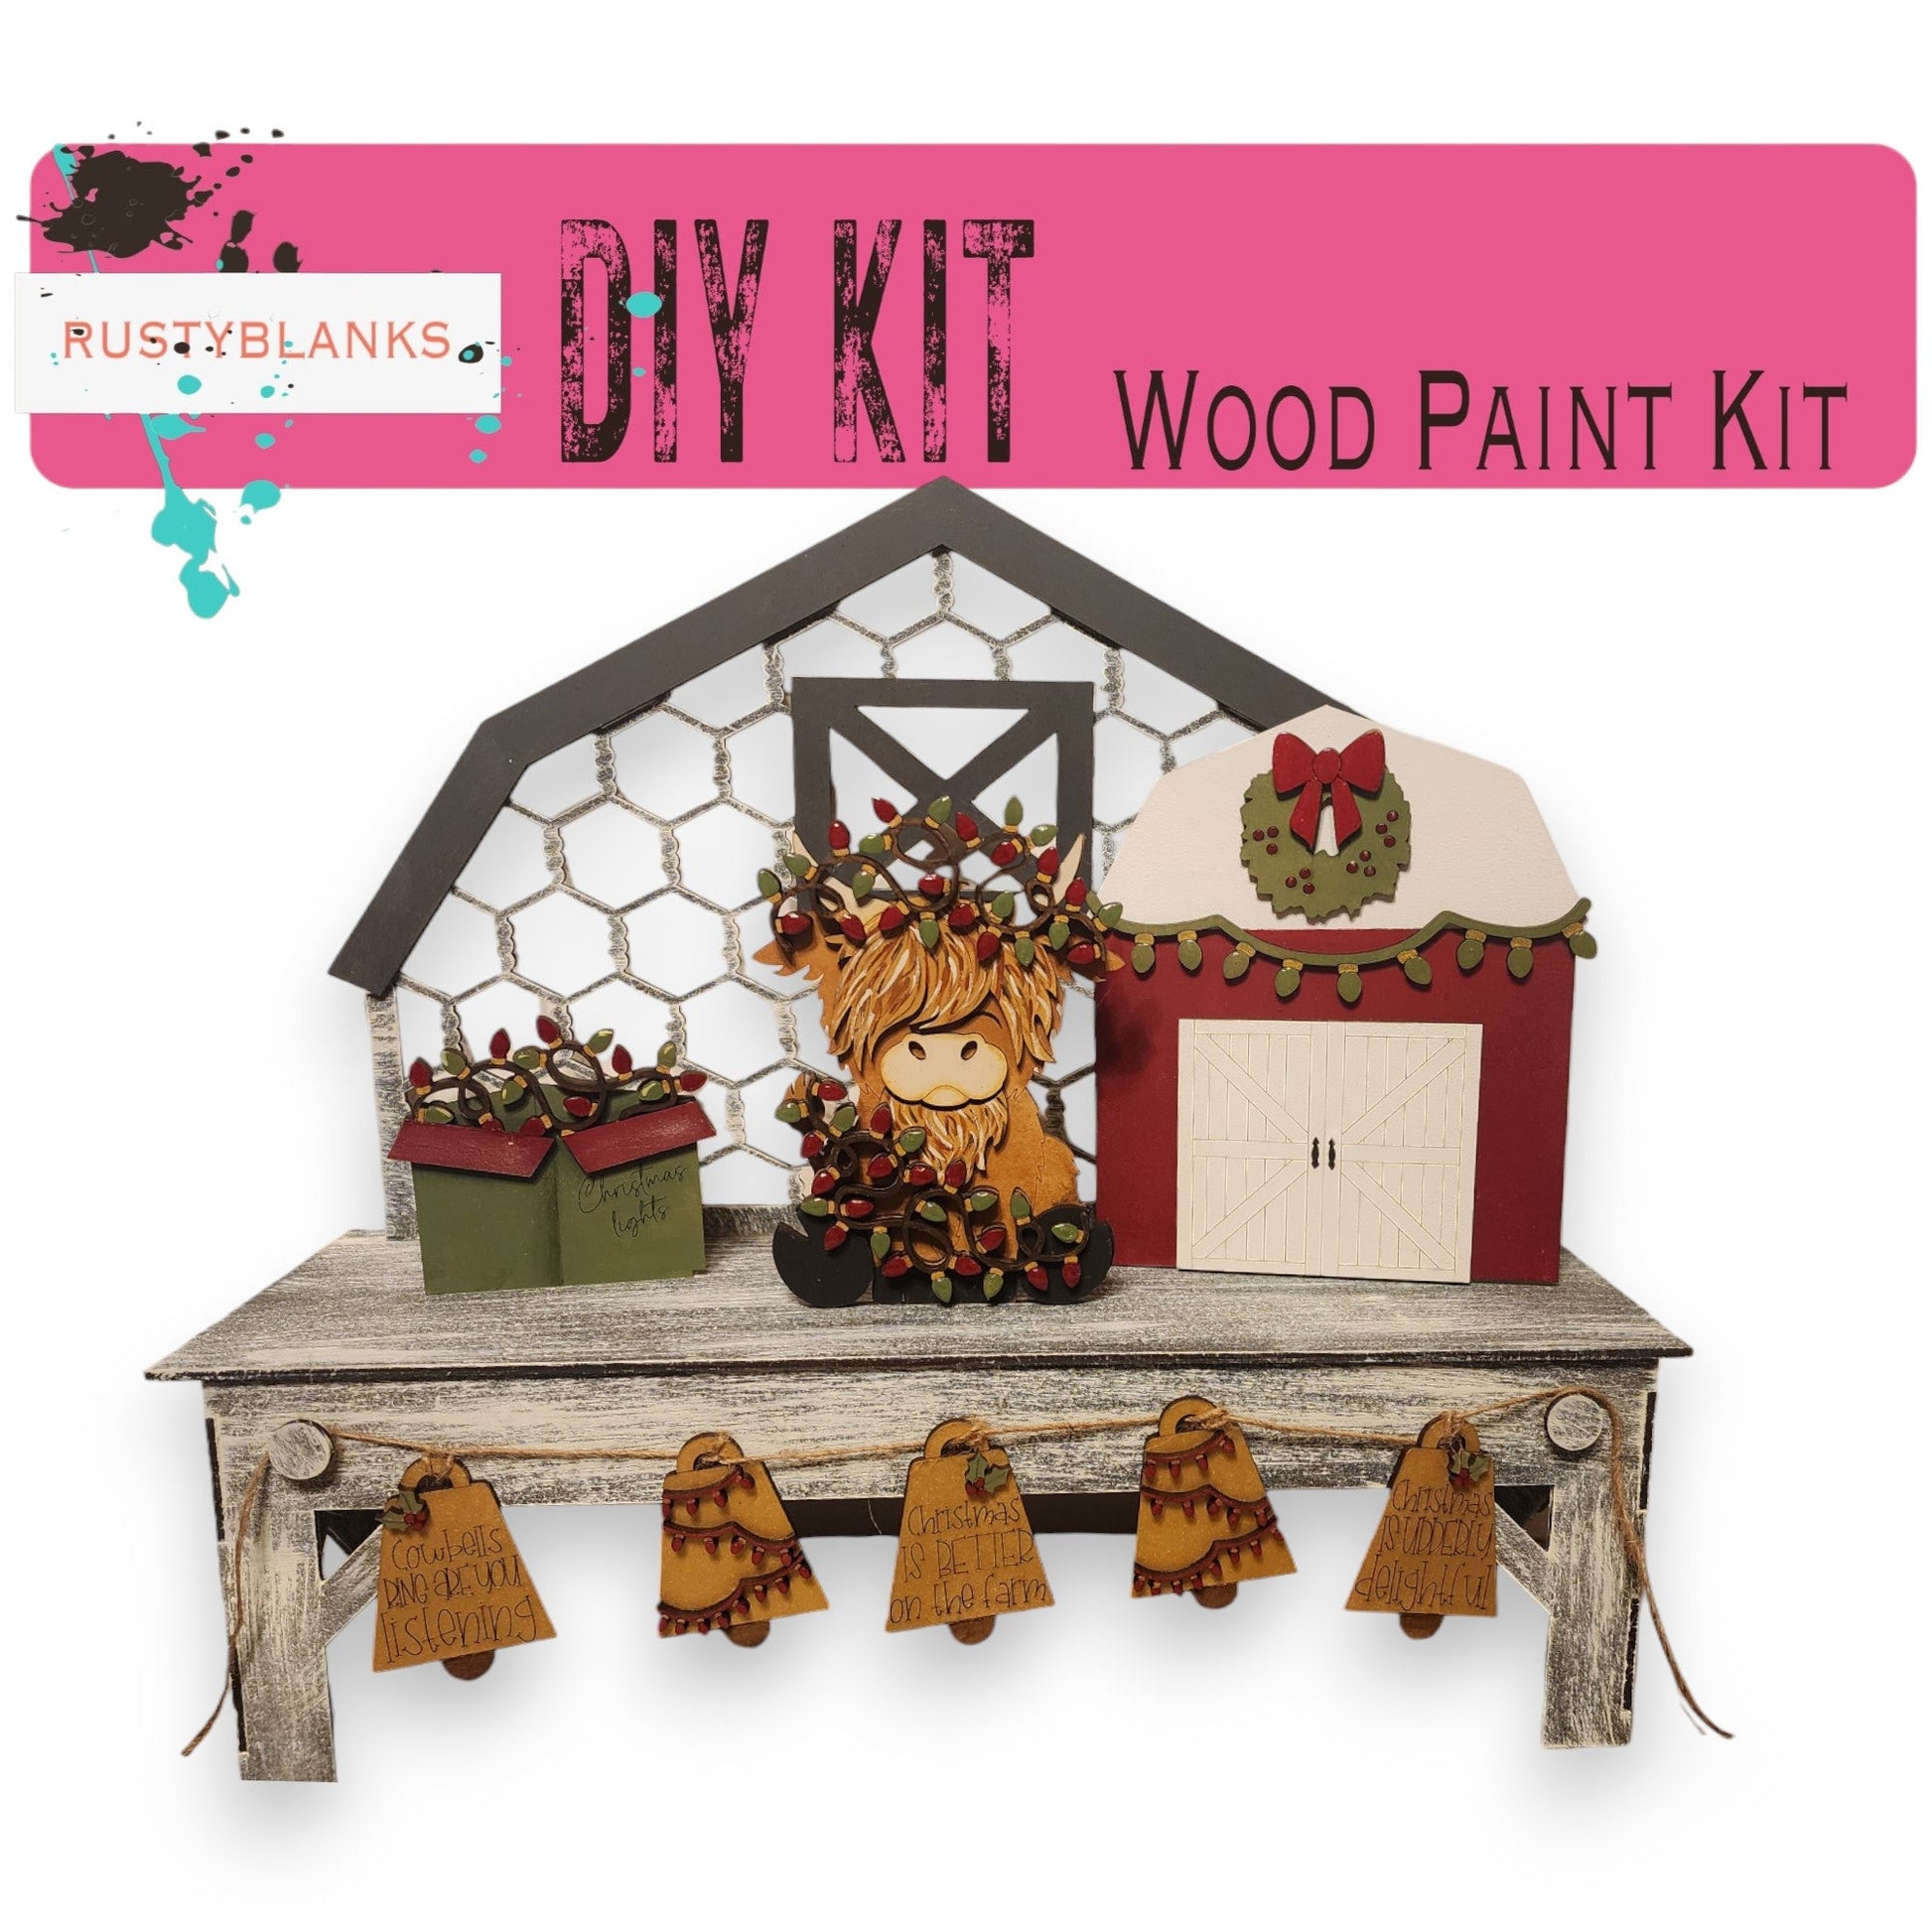 a picture of a wooden paint kit with a barn